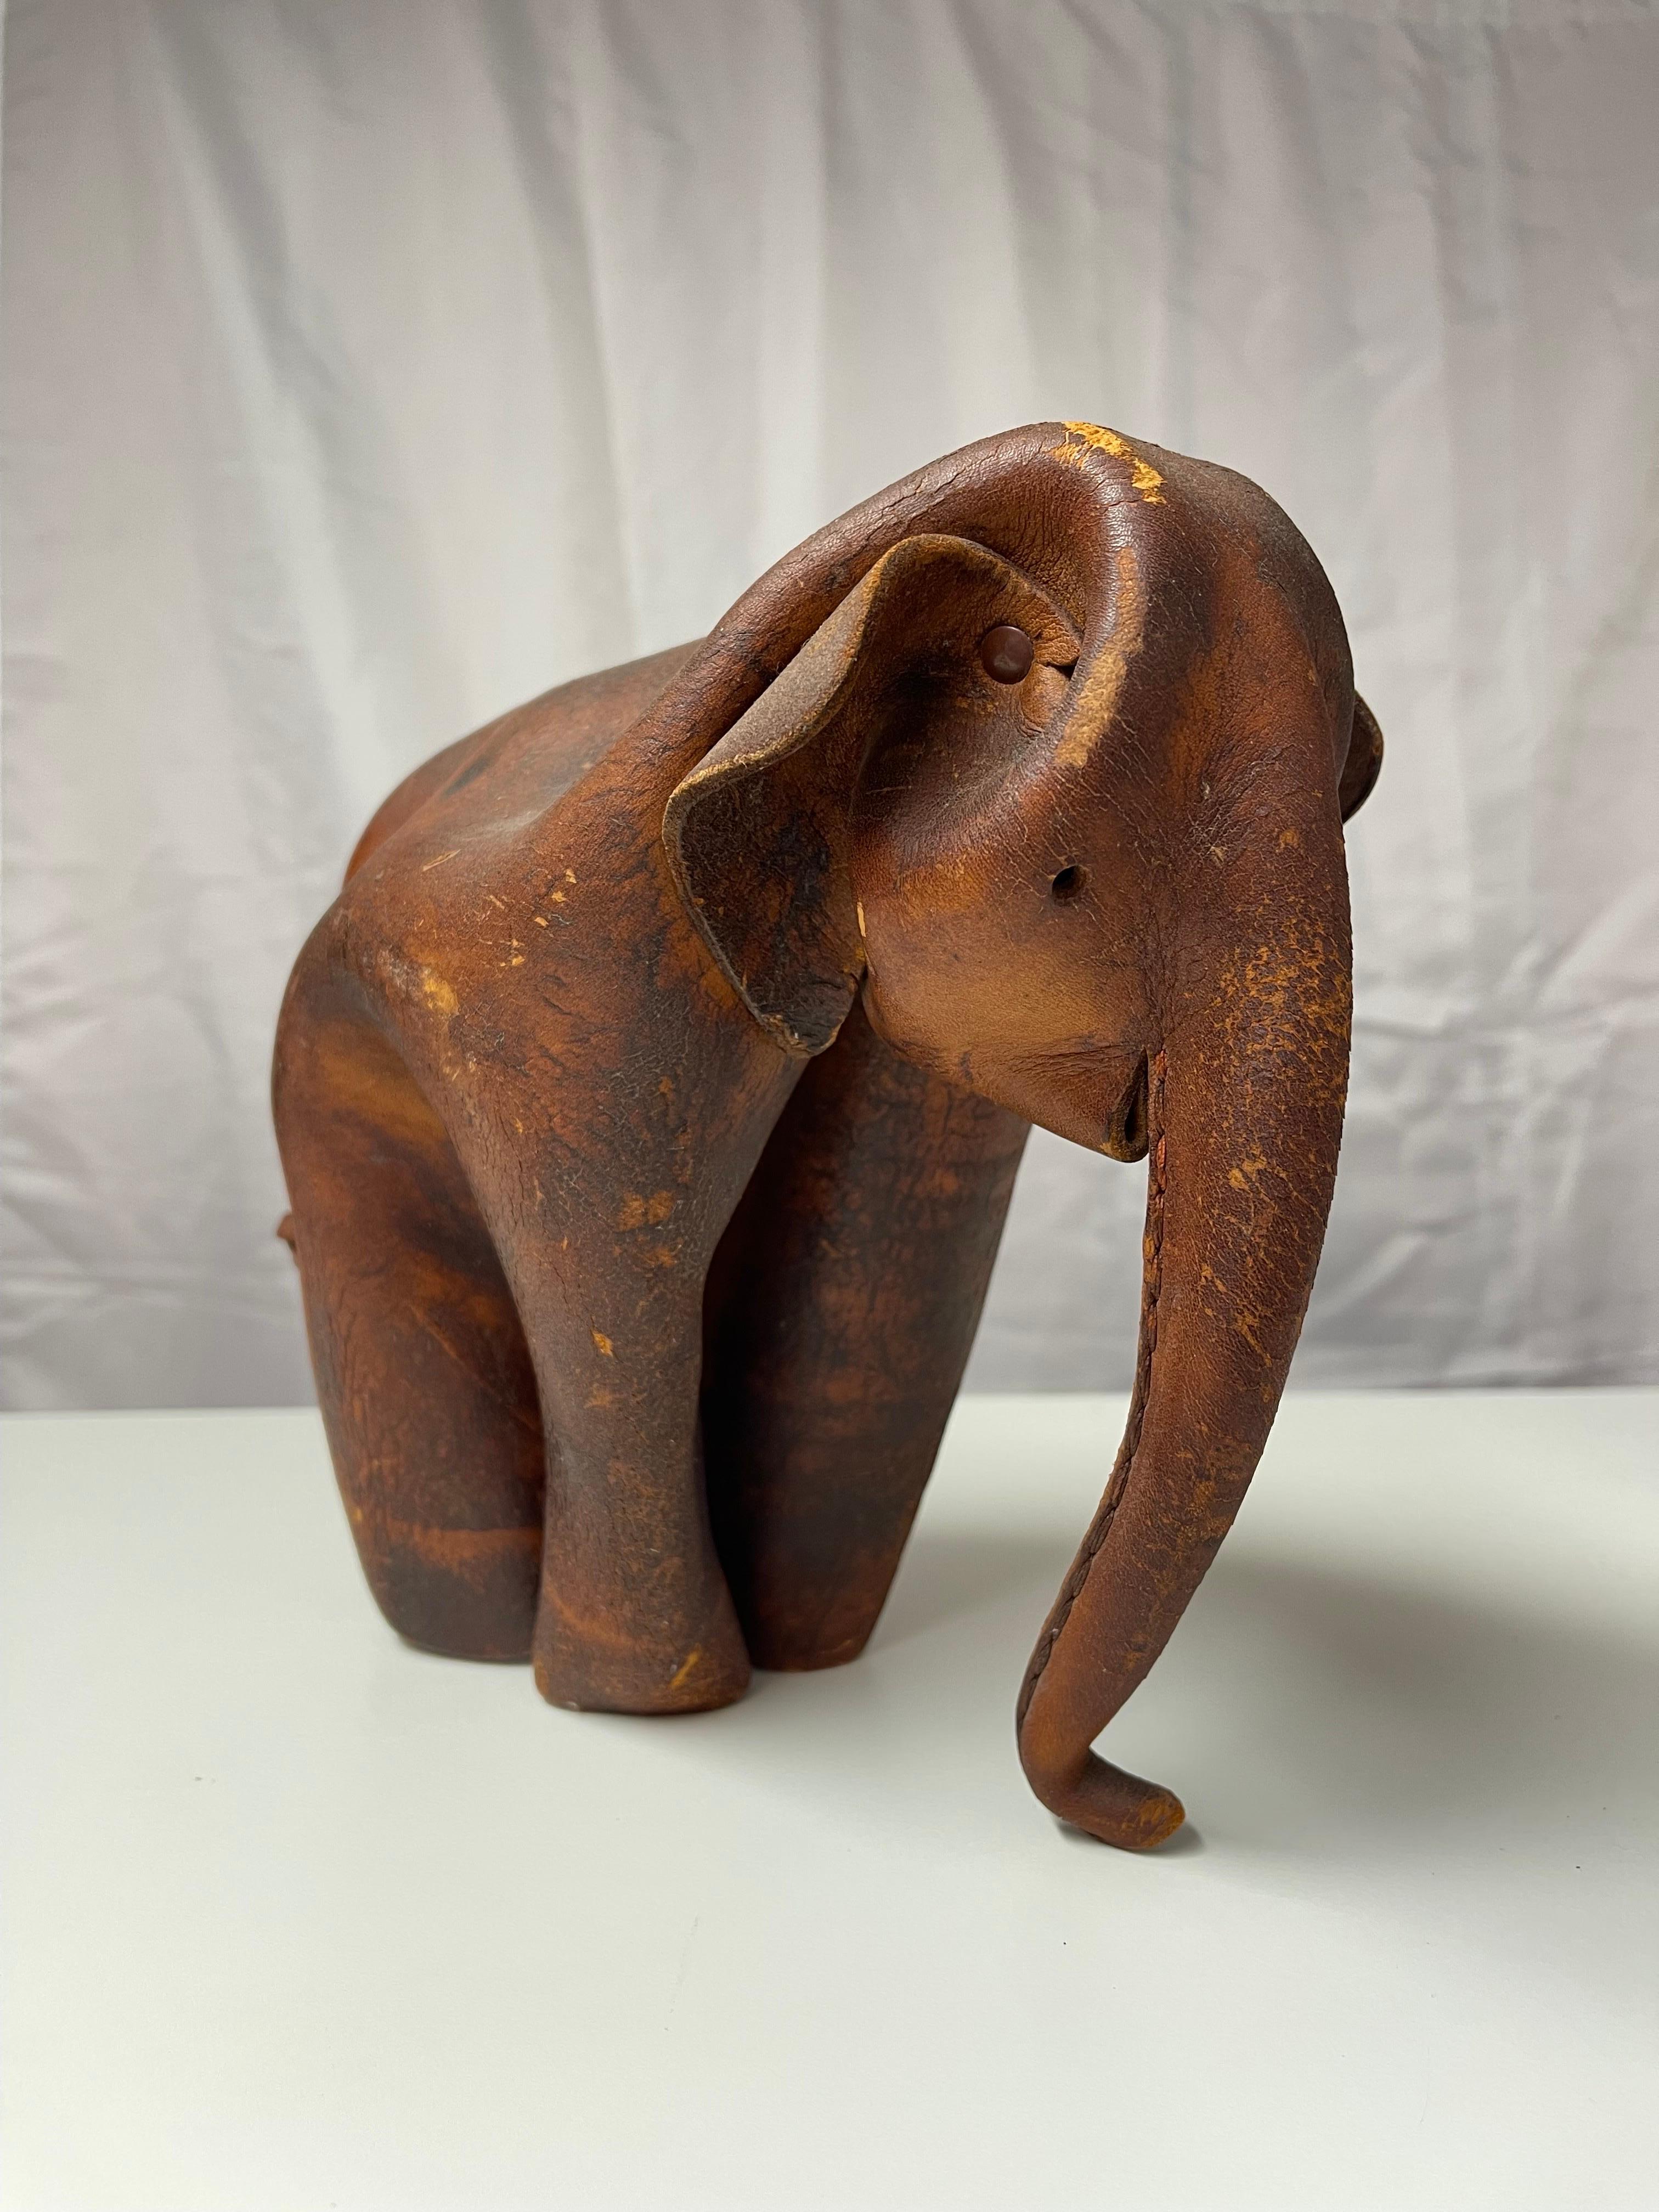 1960s Vintage Leather Deru Elephant . Designed and produced by the German manufacturer DERU in Wiesbaden in the 1960s.  This leather origami elephant is folded from a single piece of leather and cleverly shaped and sewn into an irresistible